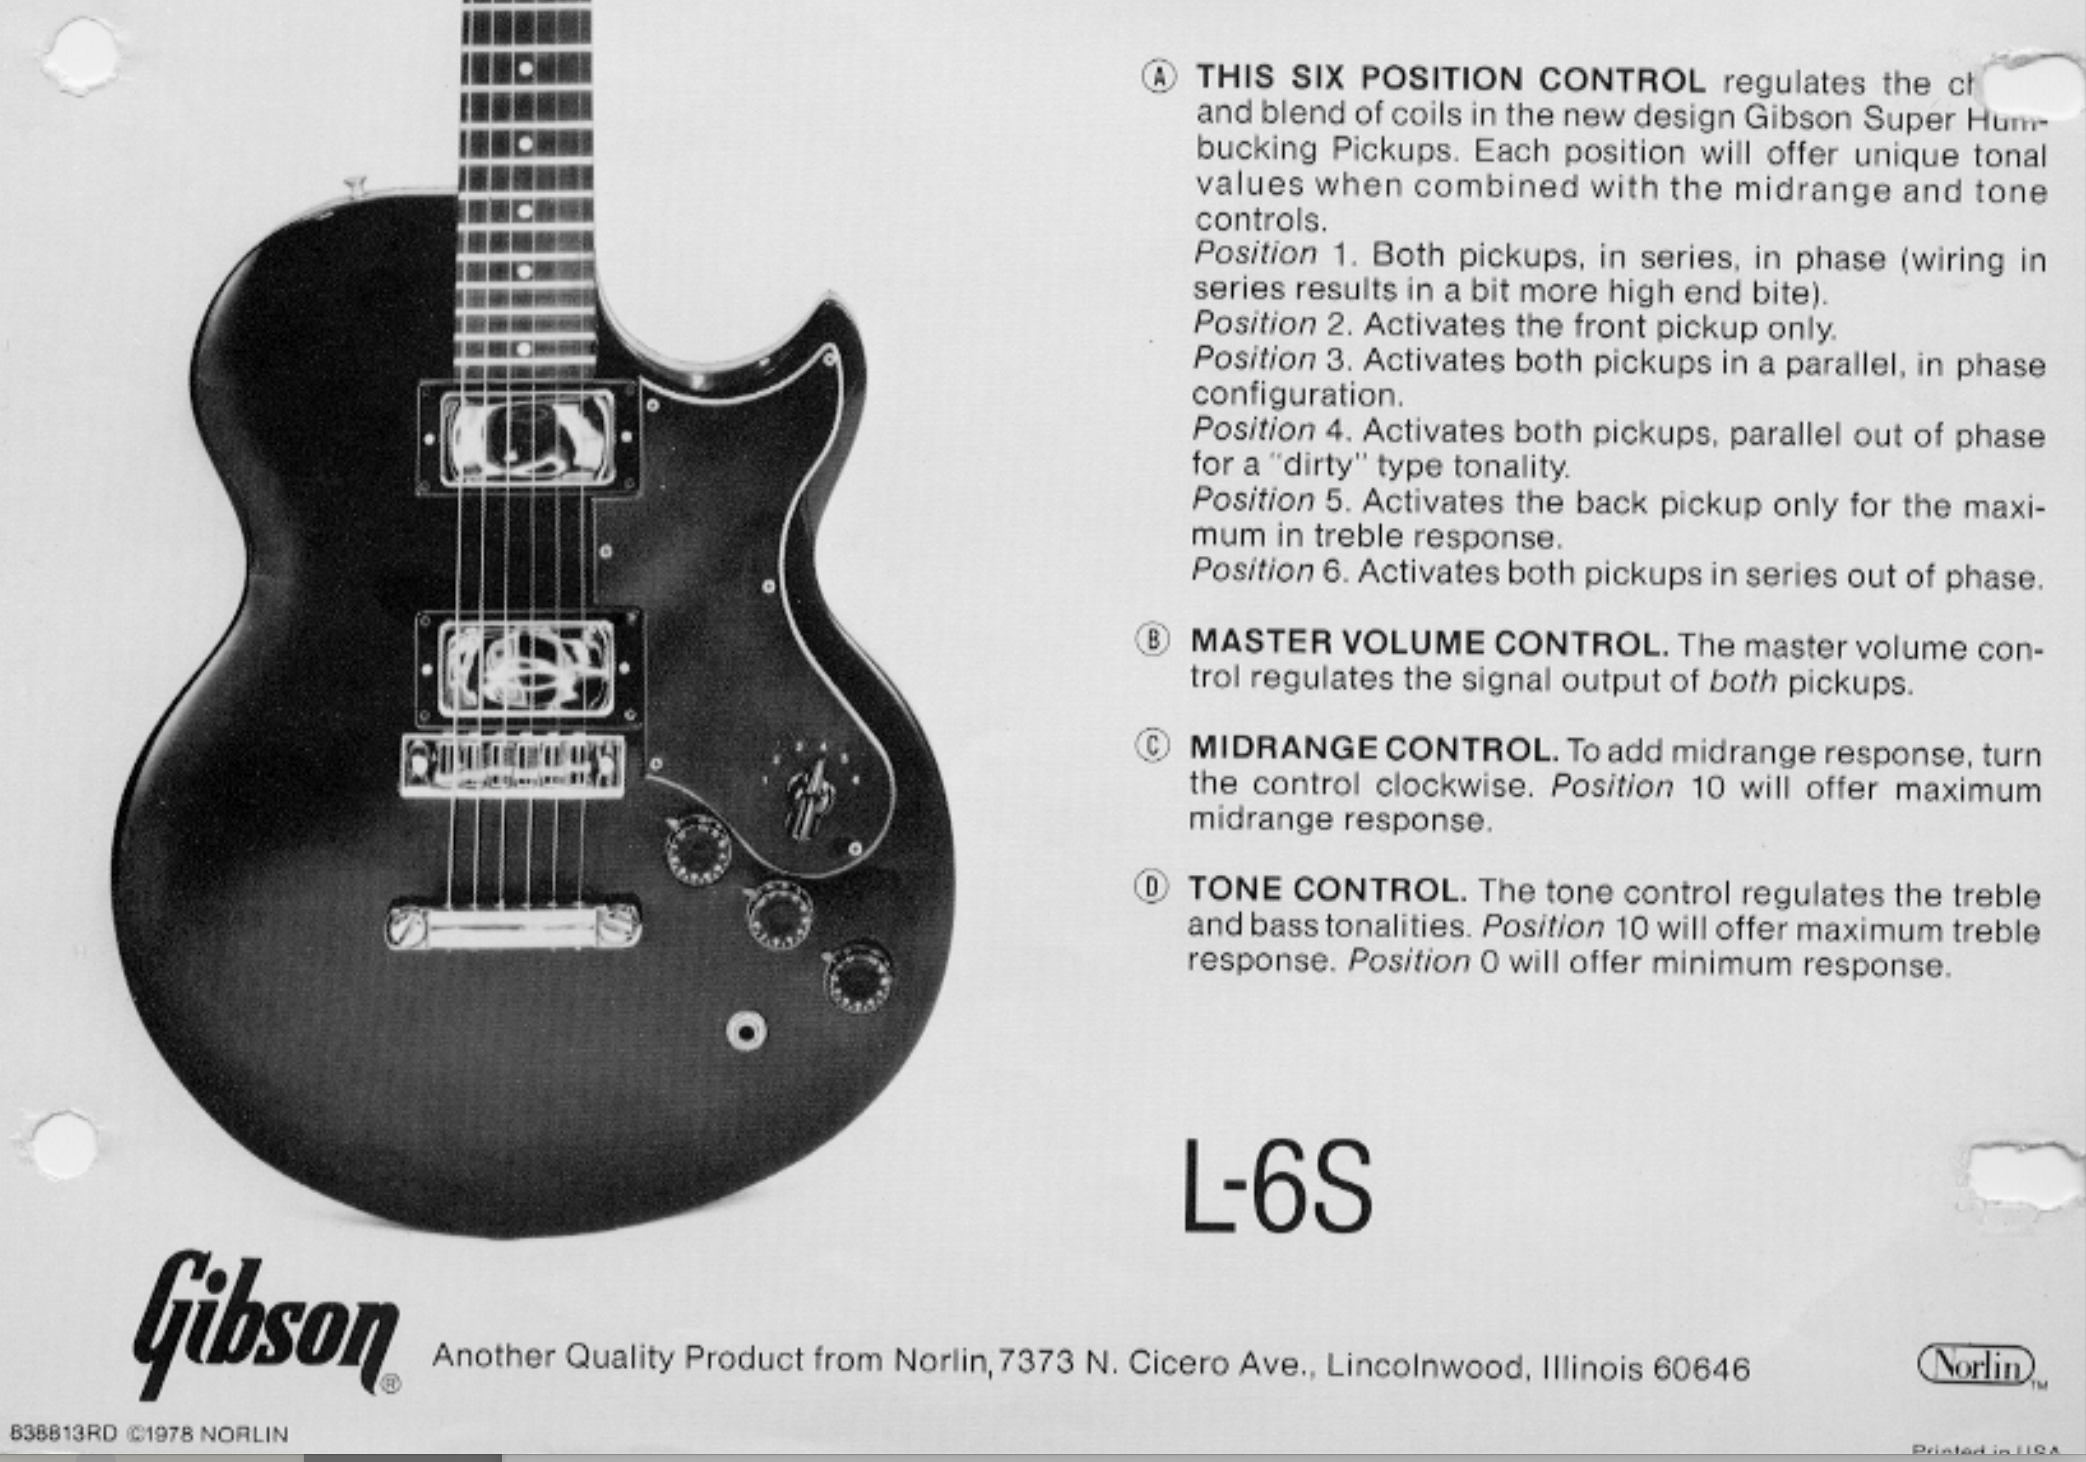 Gibson Les Paul - What well-known jazz guitar players have used one?-screenshot-2021-09-12-11-18-48-am-png